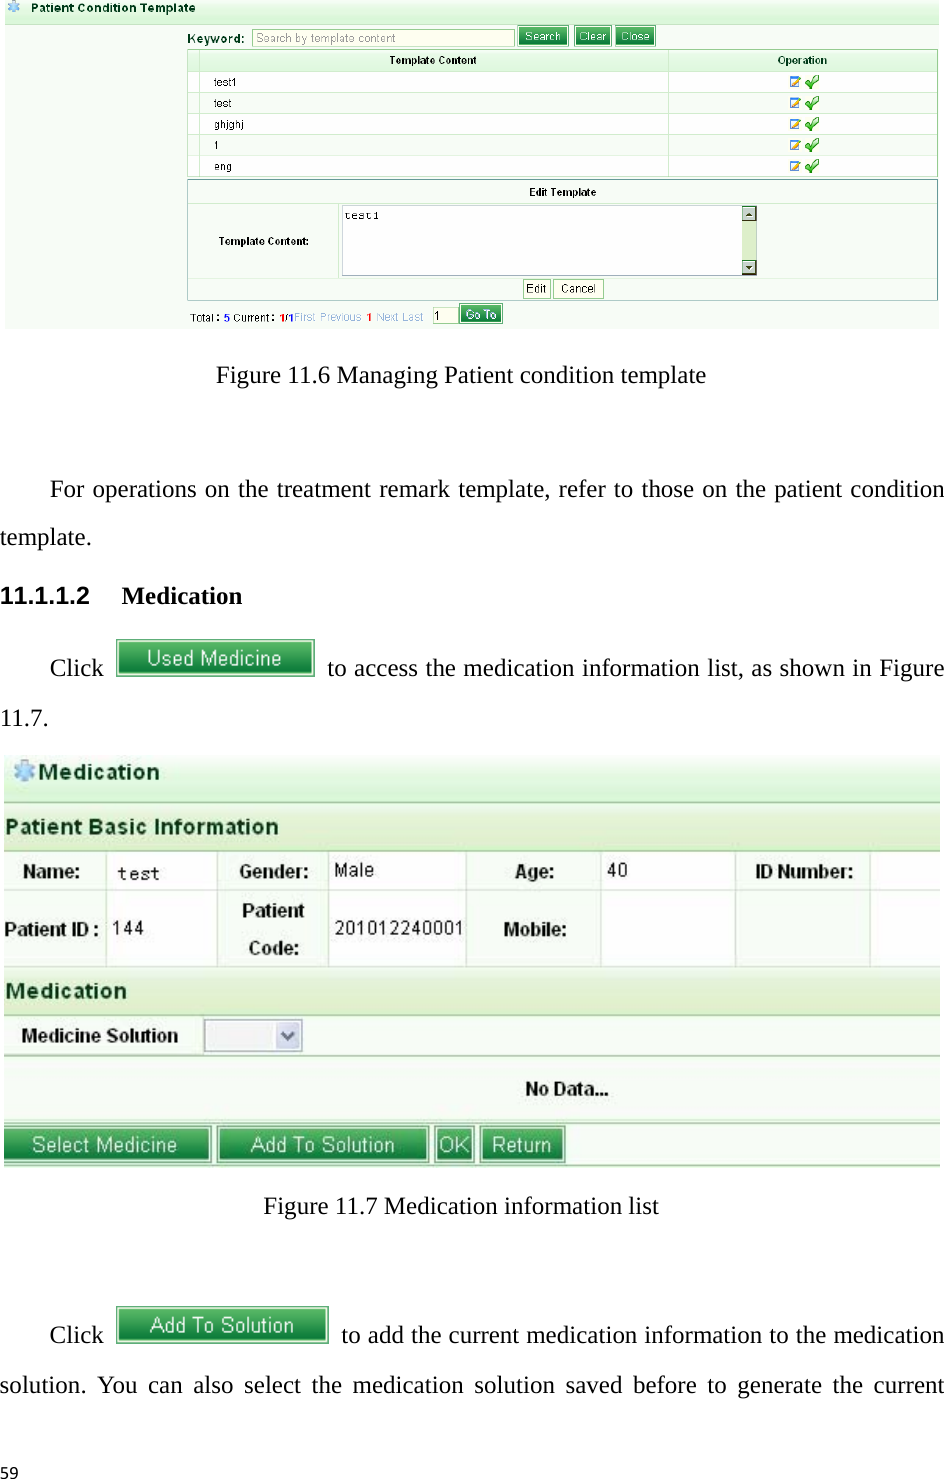 59 Figure 11.6 Managing Patient condition template  For operations on the treatment remark template, refer to those on the patient condition template.  11.1.1.2   Medication  Click    to access the medication information list, as shown in Figure 11.7.   Figure 11.7 Medication information list  Click    to add the current medication information to the medication solution. You can also select the medication solution saved before to generate the current 